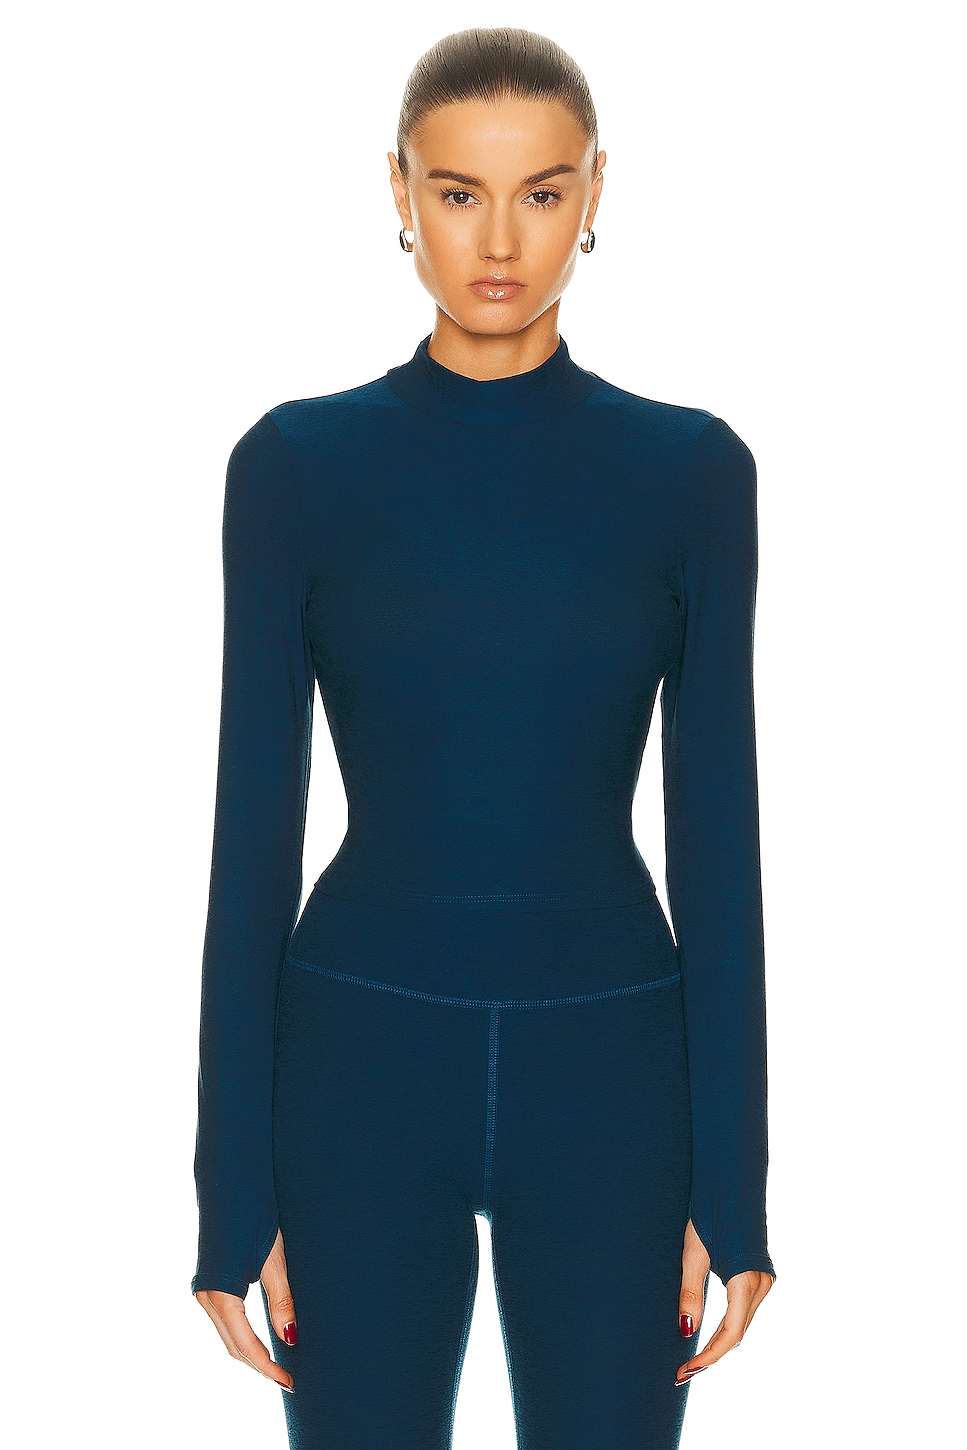 Image 1 of Beyond Yoga Featherweight Moving On Cropped Pullover Top in Blue Gem Heather